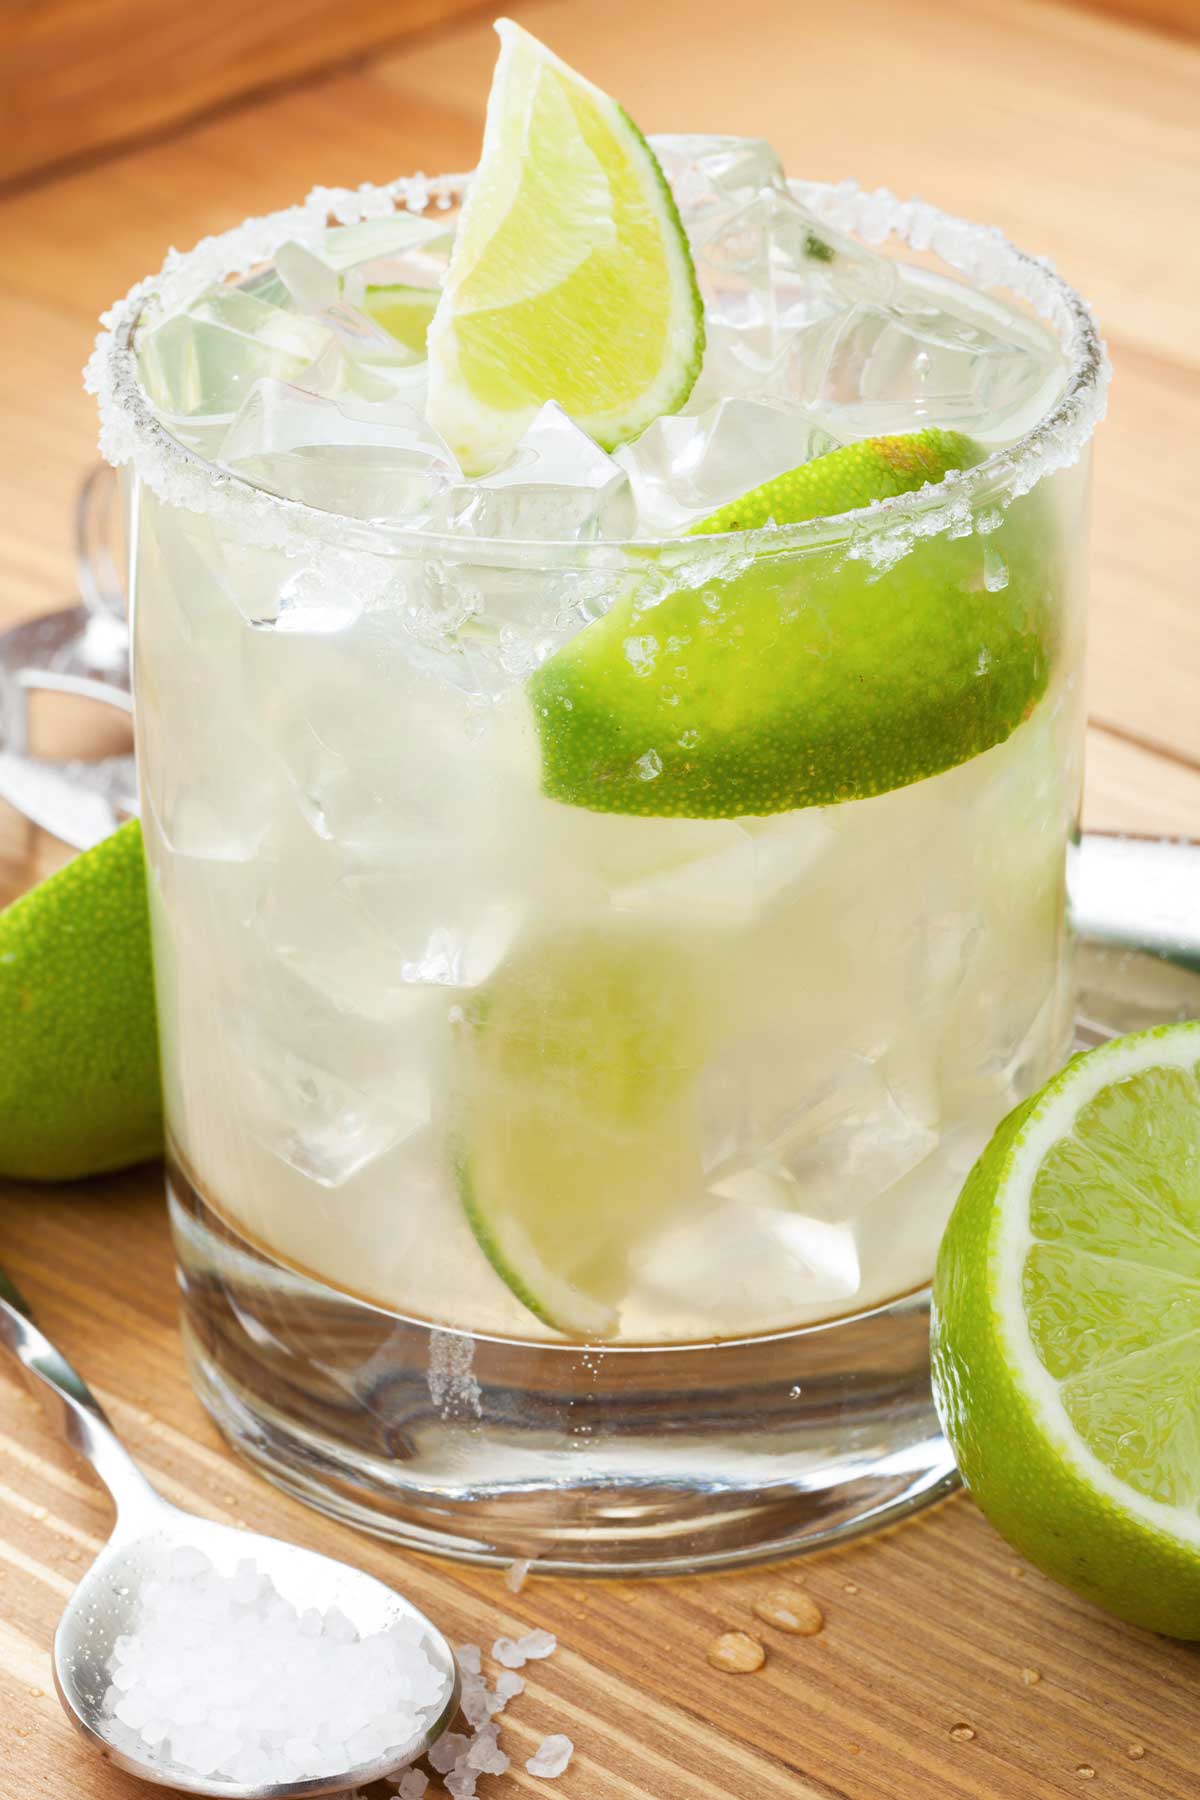 Low-calorie margarita in a salt rimmed glass with wedges of lime, fresh whole  lime sliced on wooden countertop.